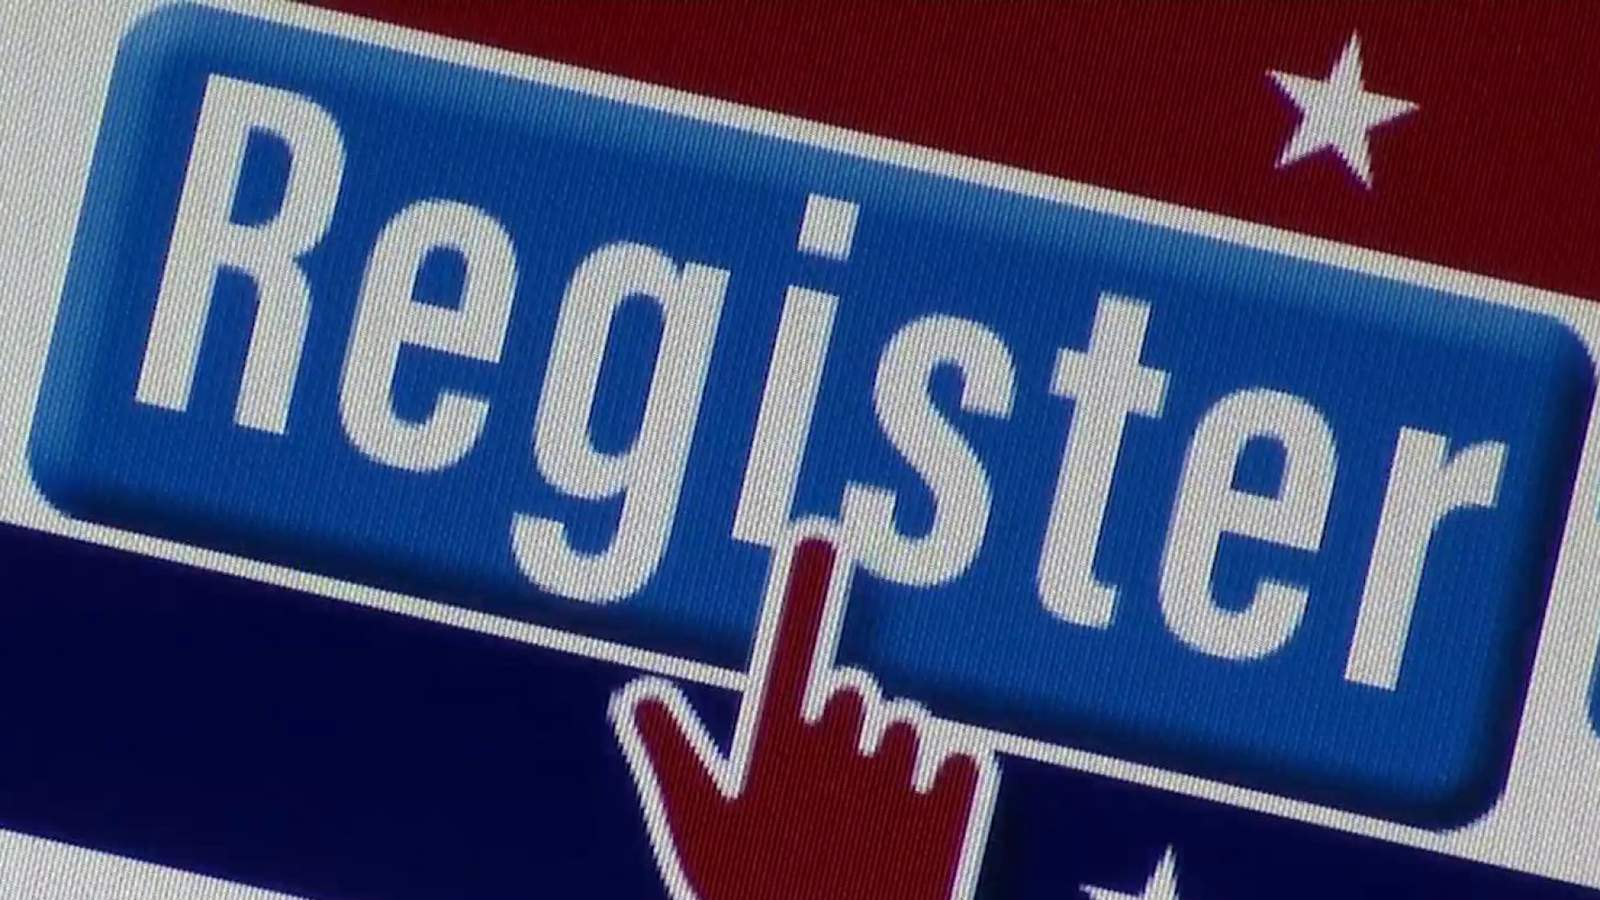 Lt. Gov. Fairfax calls to extend voter registration amid Virginia outages